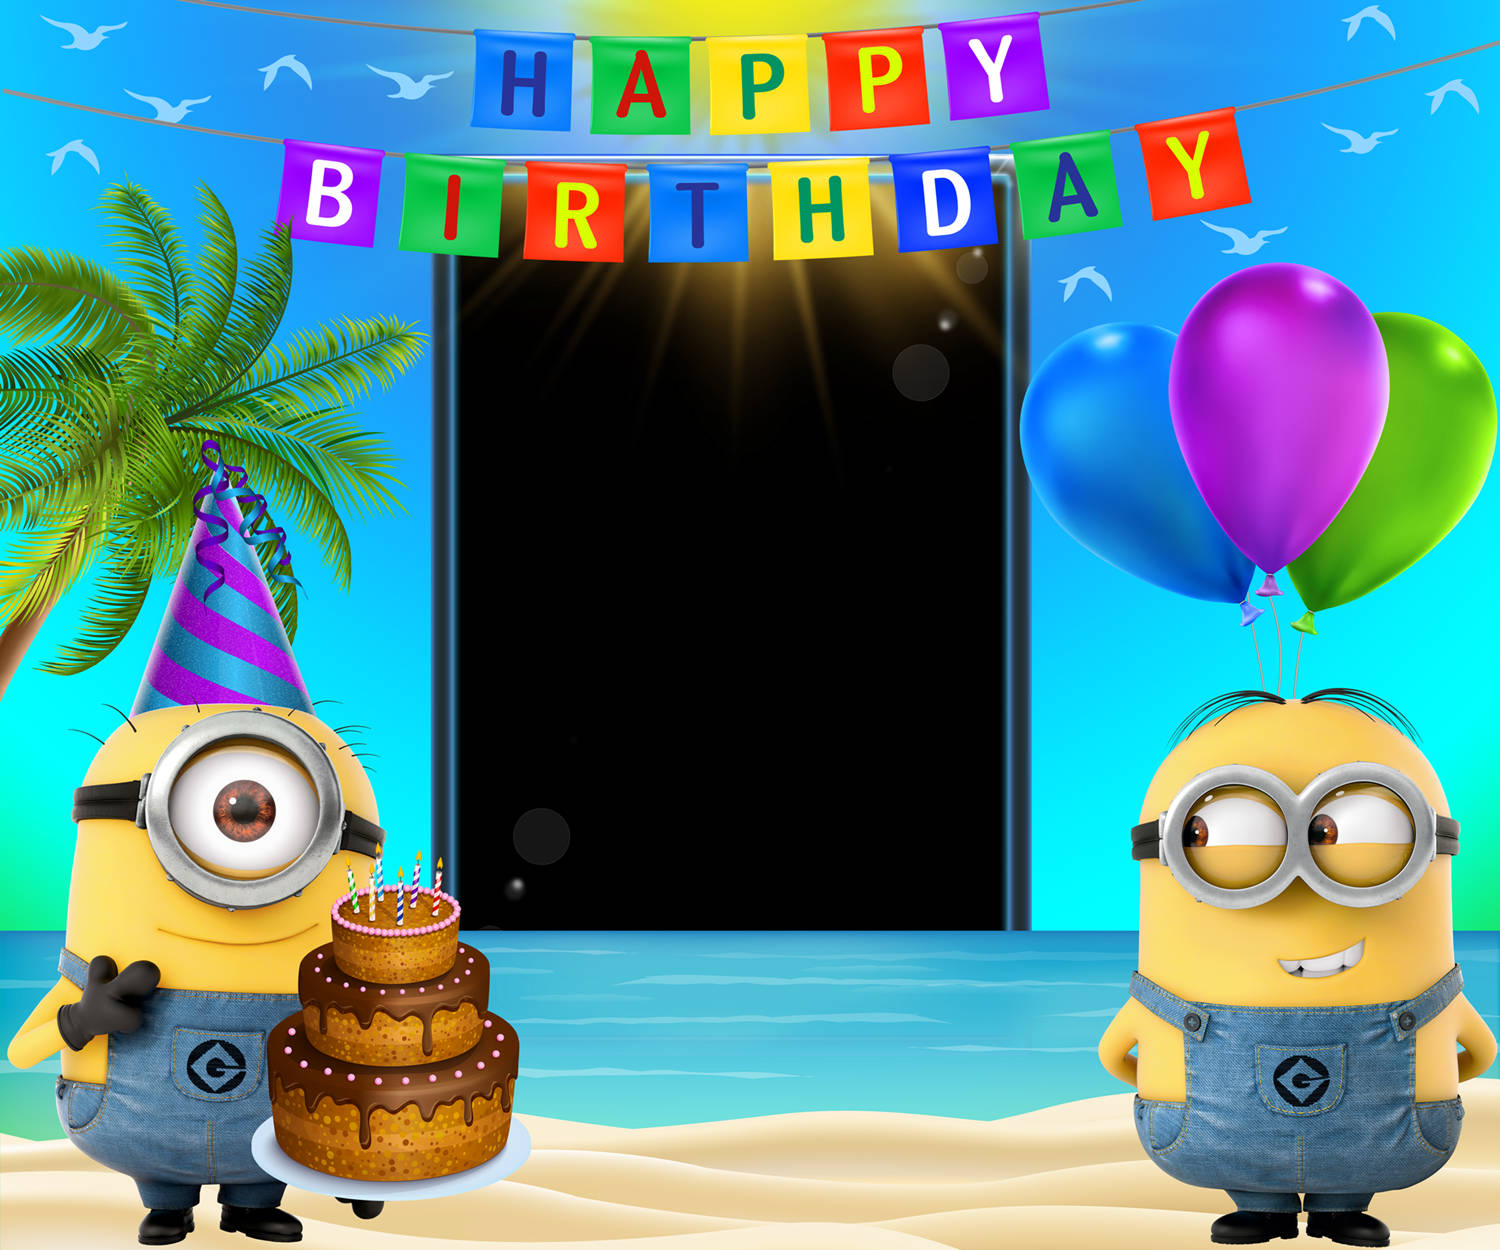 The cutest way to celebrate a birthday – with Minions! Wallpaper